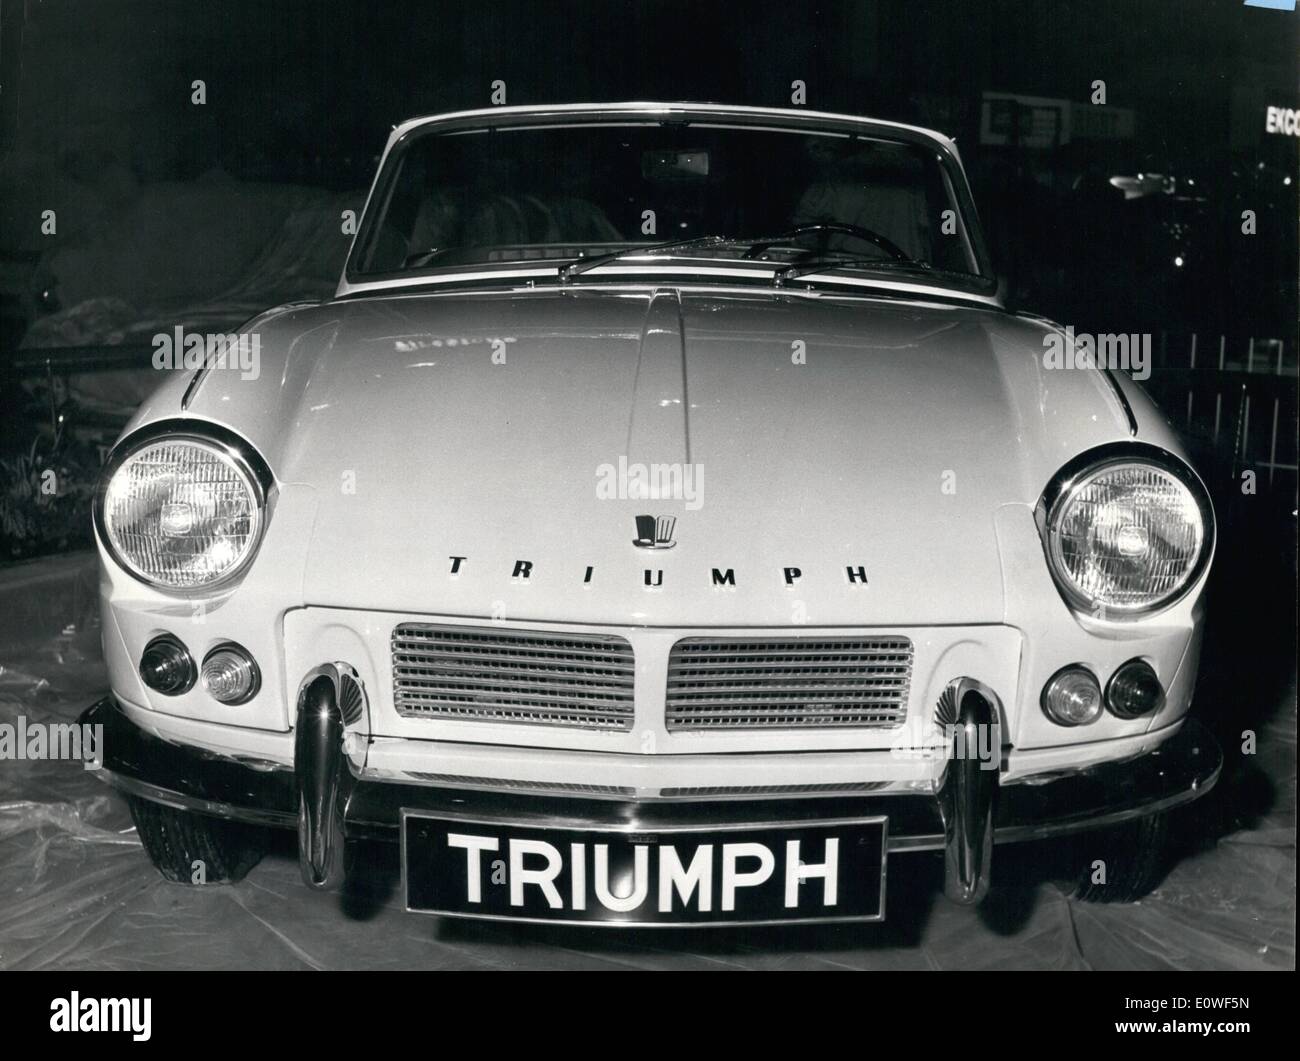 Oct. 10, 1962 - New Cars At Earls Court: The new British are arriving at Earls Court in London in preparation for the annual motor show which opens there on Wednesday October 17. Photo Shows: A new model from the Triumph factory: The Triumph Spitfire 4, priced at & 729. Stock Photo